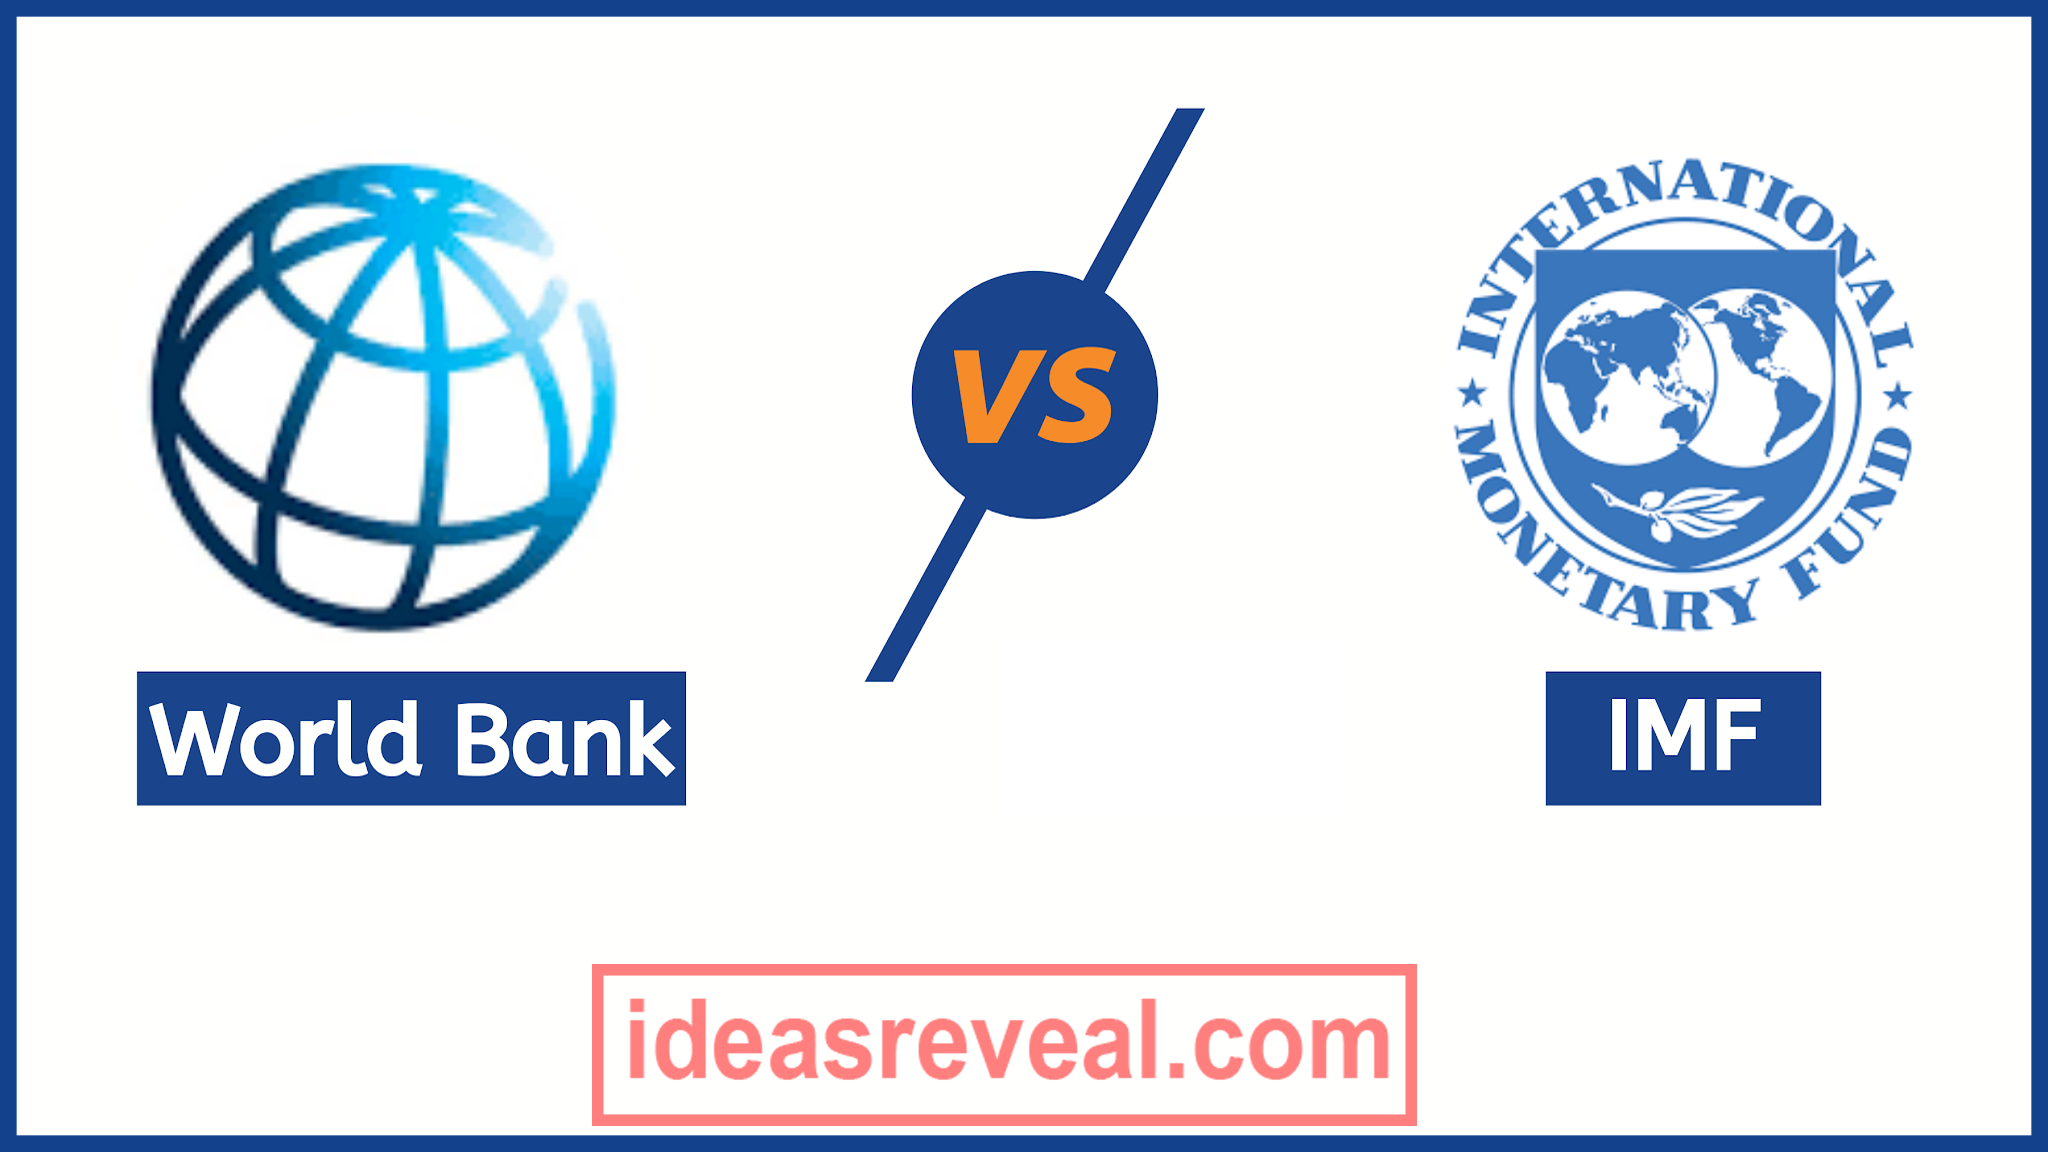 Difference Between World Bank and IMF